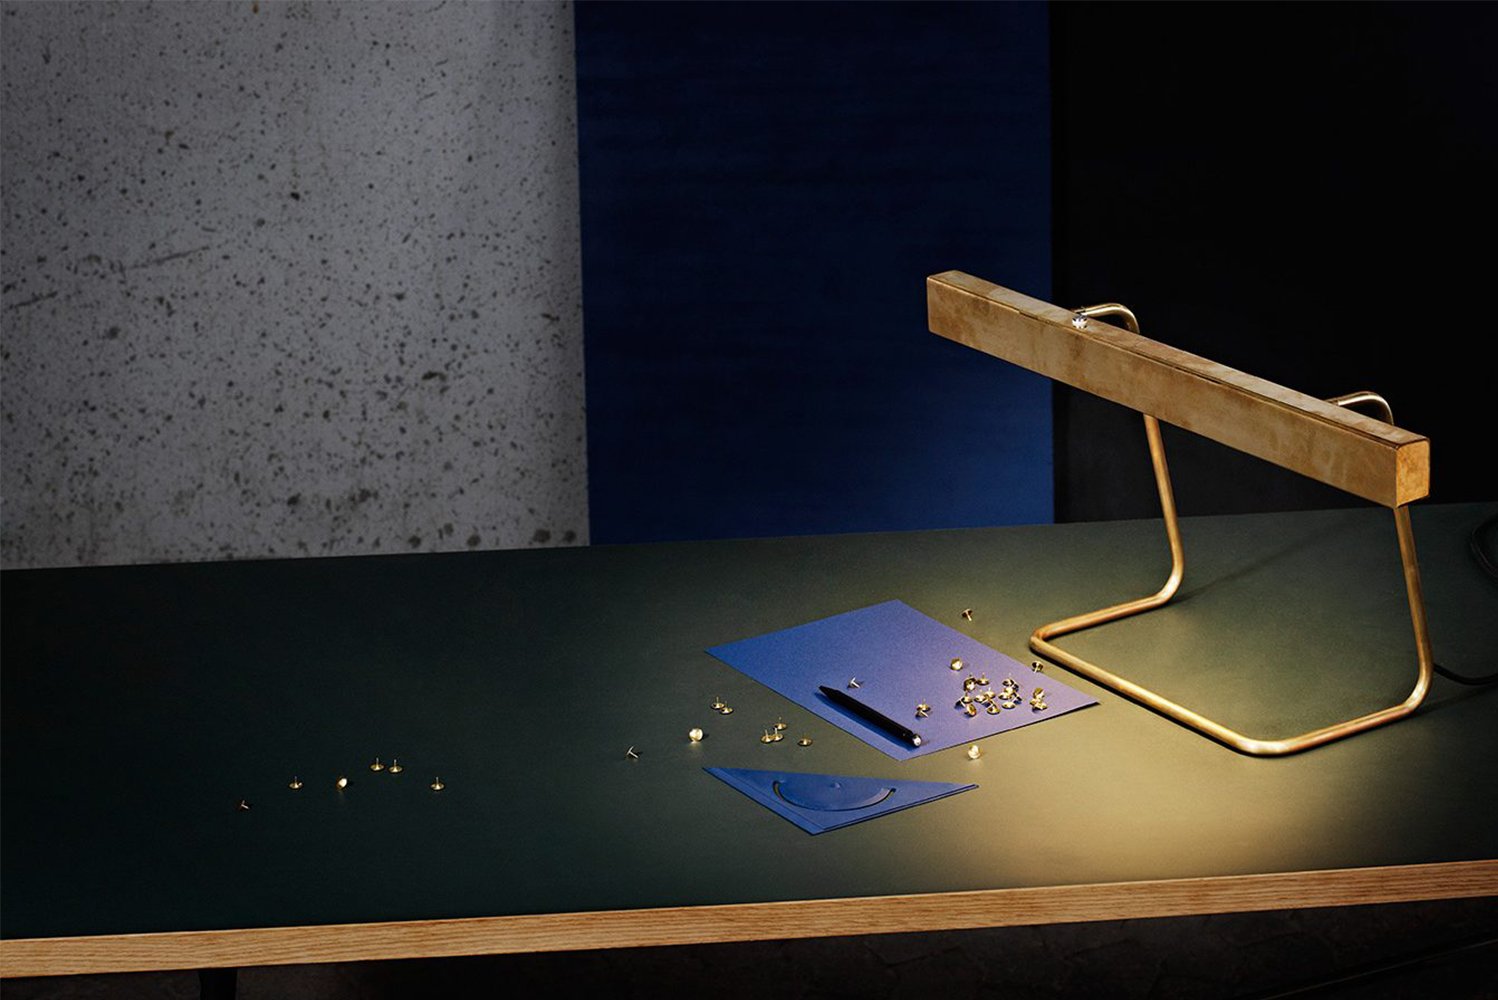 Anour launched the T Model desk lamp 